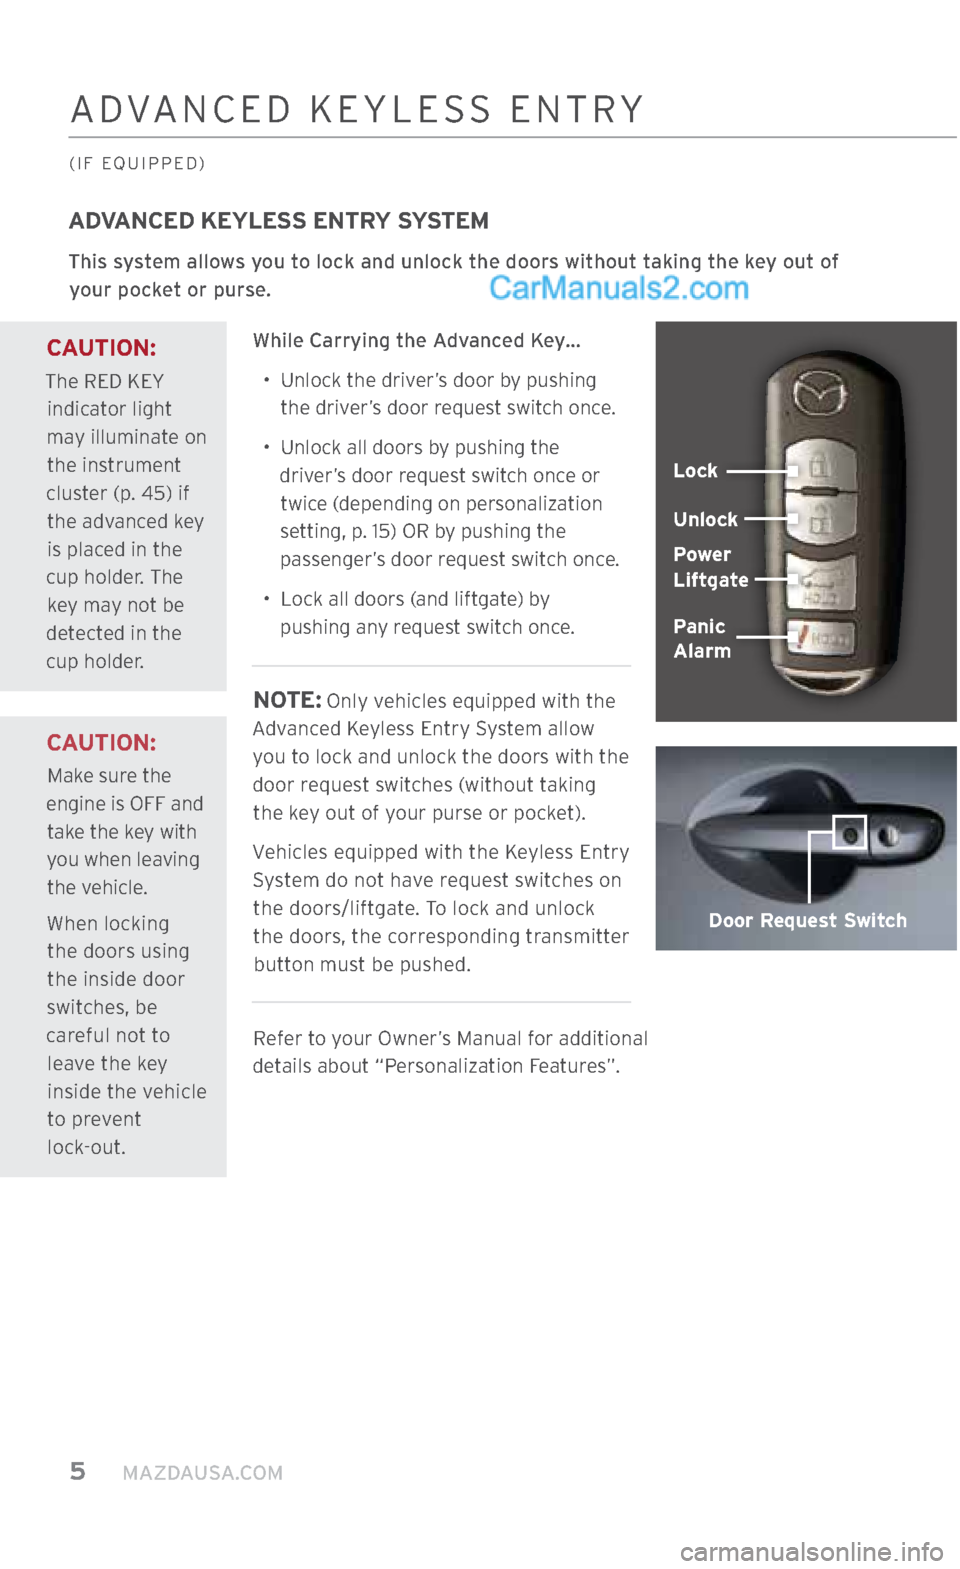 MAZDA MODEL CX-5 2017  Smart Start Guide (in English) 5     MAZDAUSA.COM
ADVANCED KEYLESS ENTRY SYSTEM
This system allows you to lock and unlock the doors without taking the key out of your pocket or purse.  
While Carrying the Advanced Key…•   
Unlo